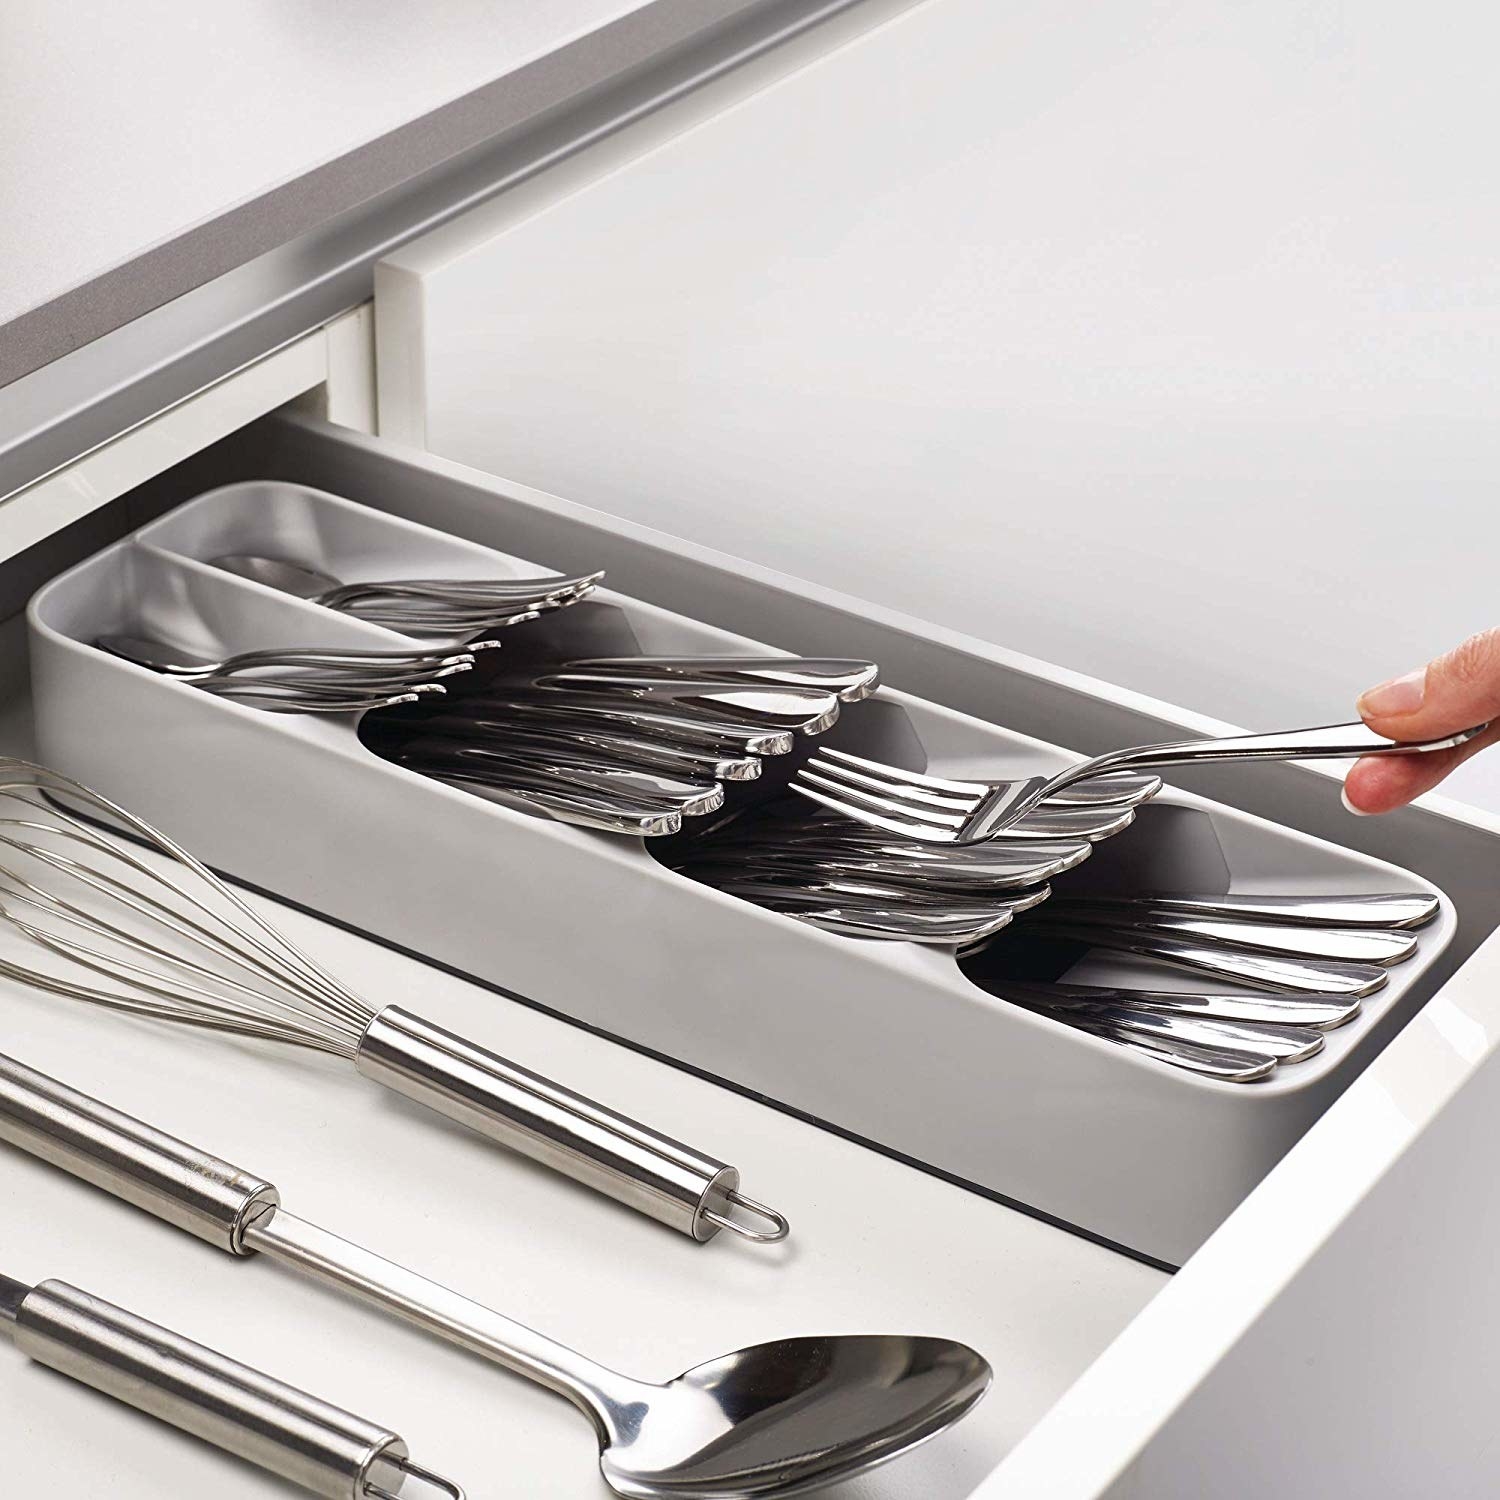 The grey tray in a drawer, filled with flatware